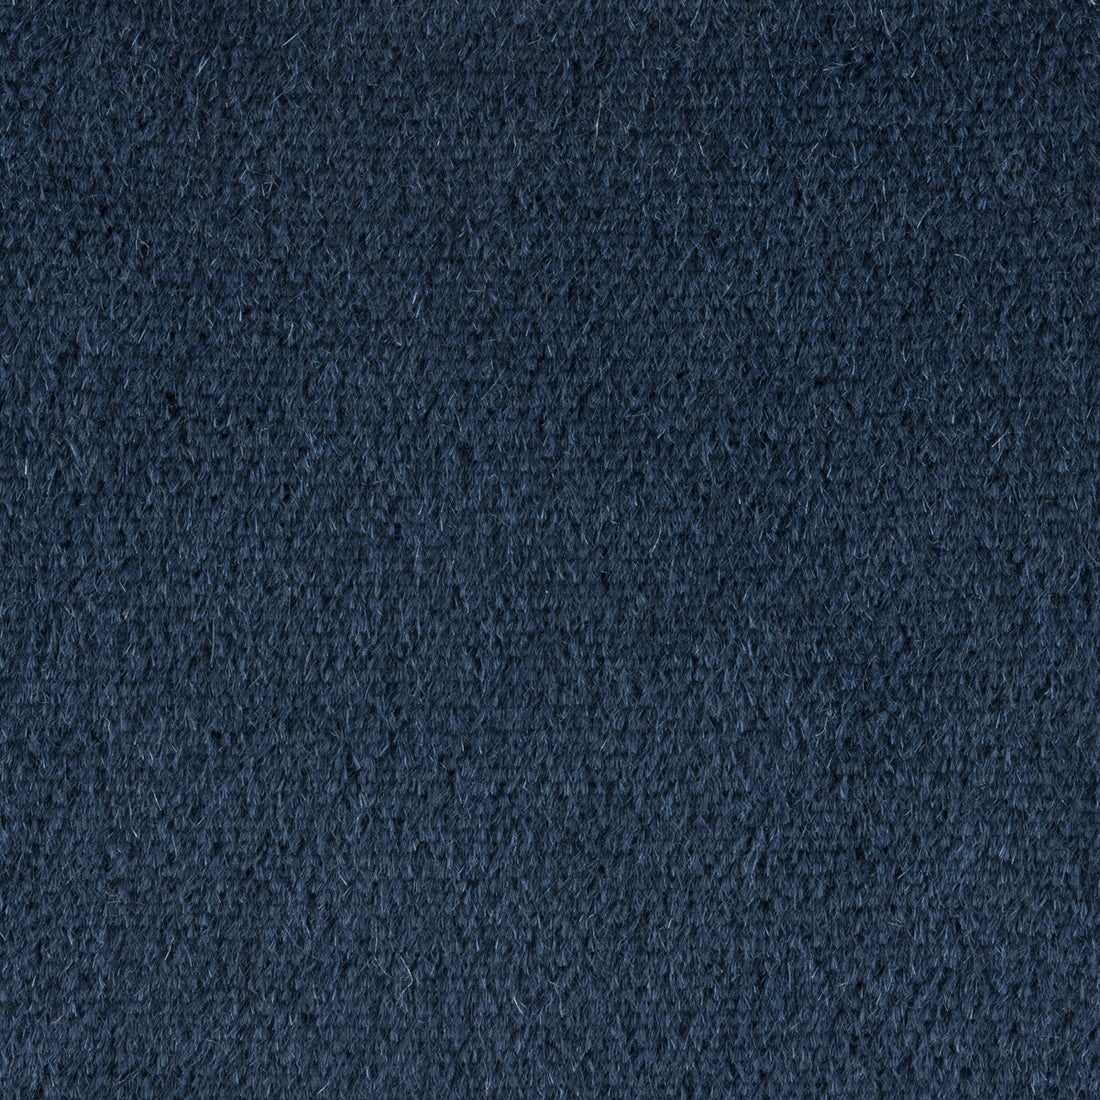 Bennett fabric in indigo color - pattern 2014138.50.0 - by Lee Jofa in the James Huniford collection